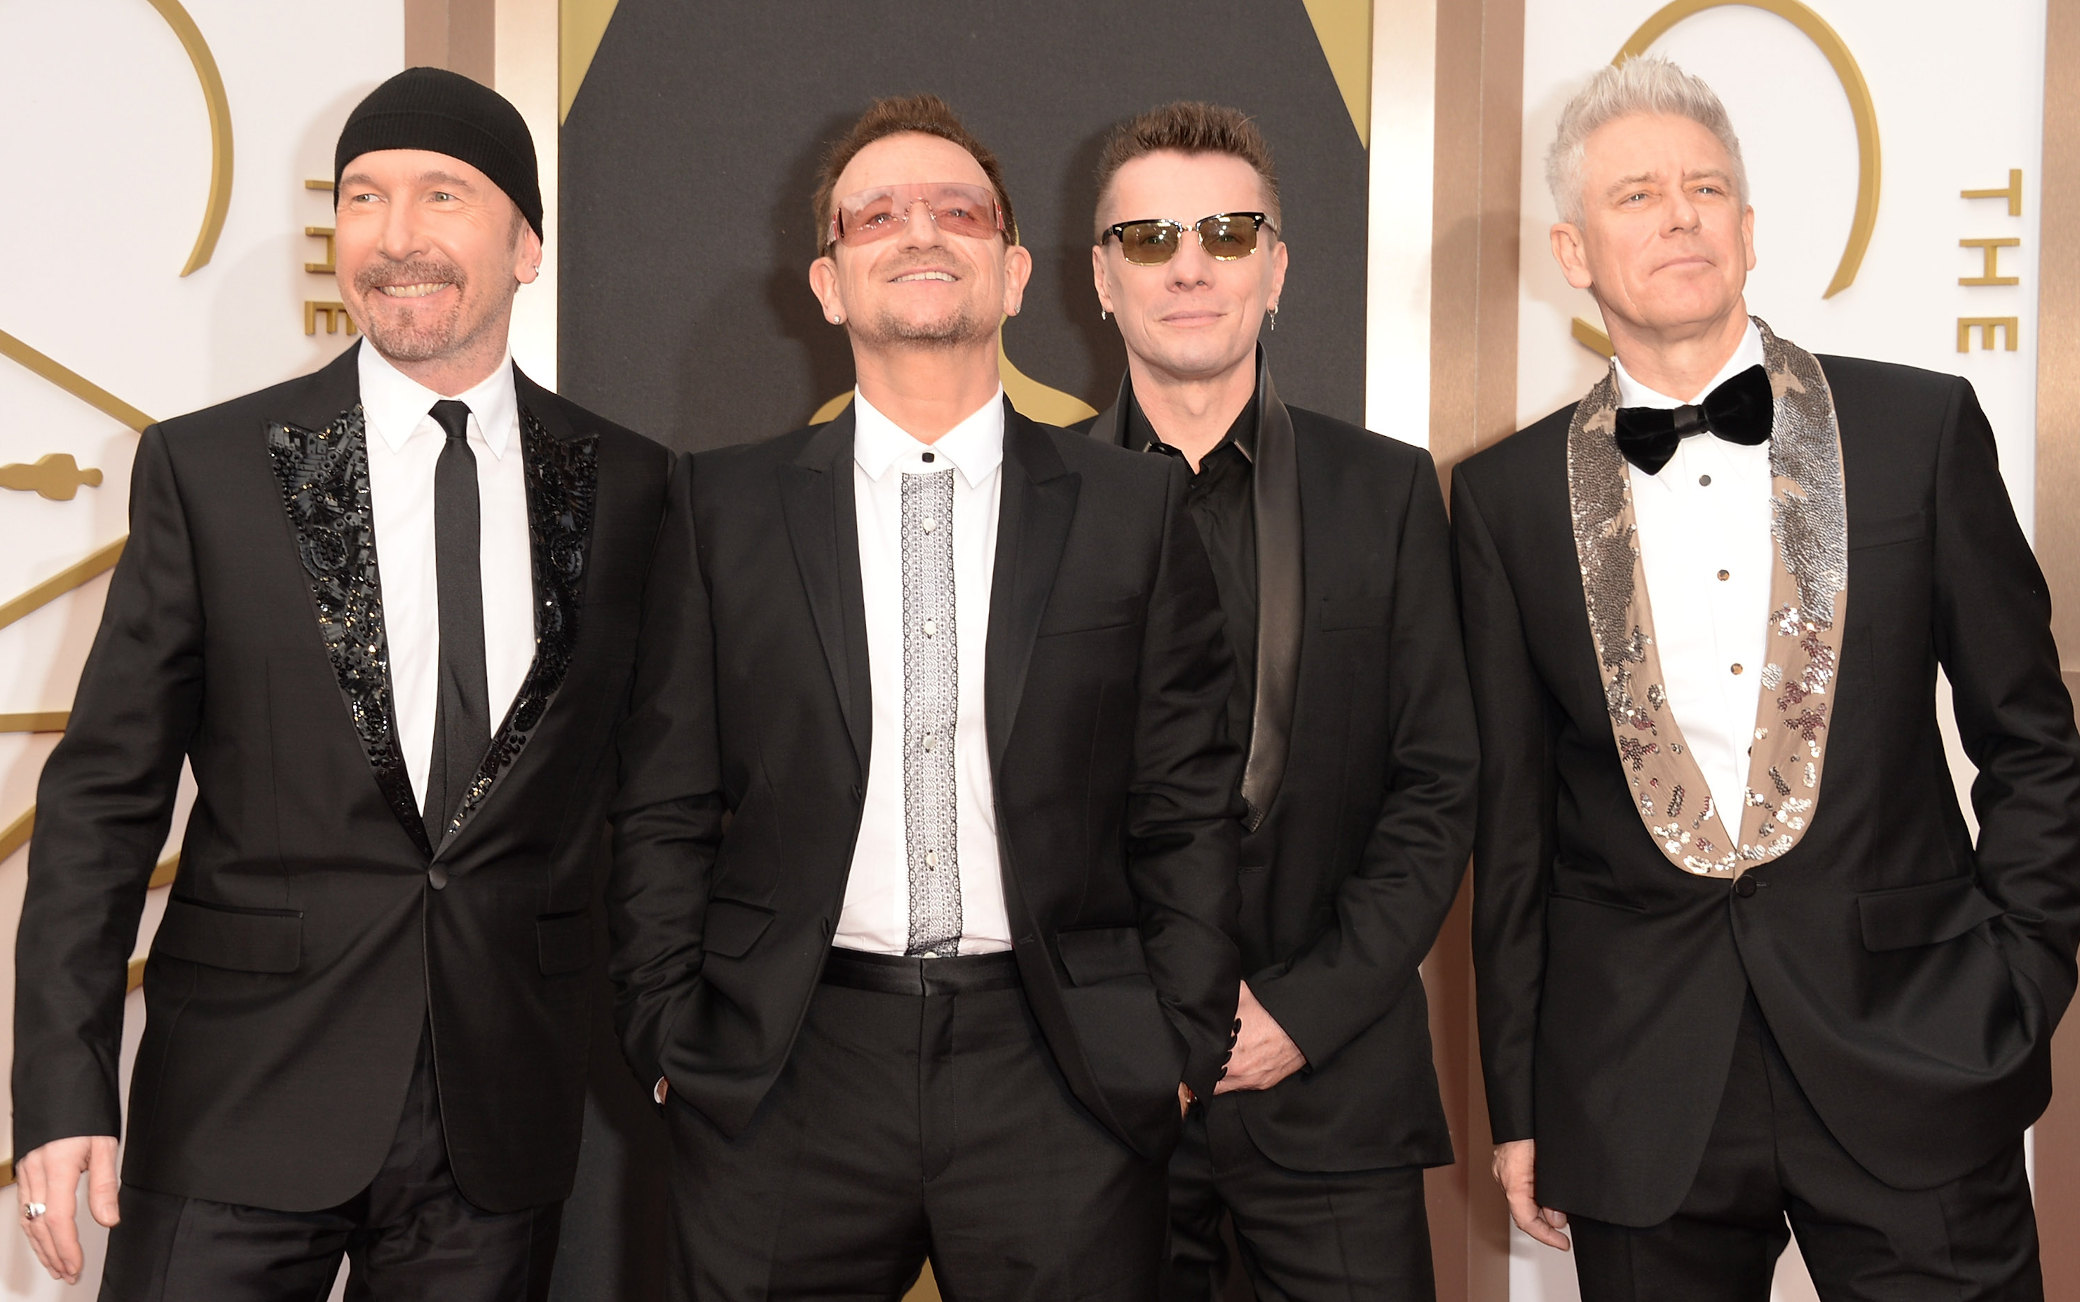 U2, JJ Abrams is developing a TV series about the band for Netflix